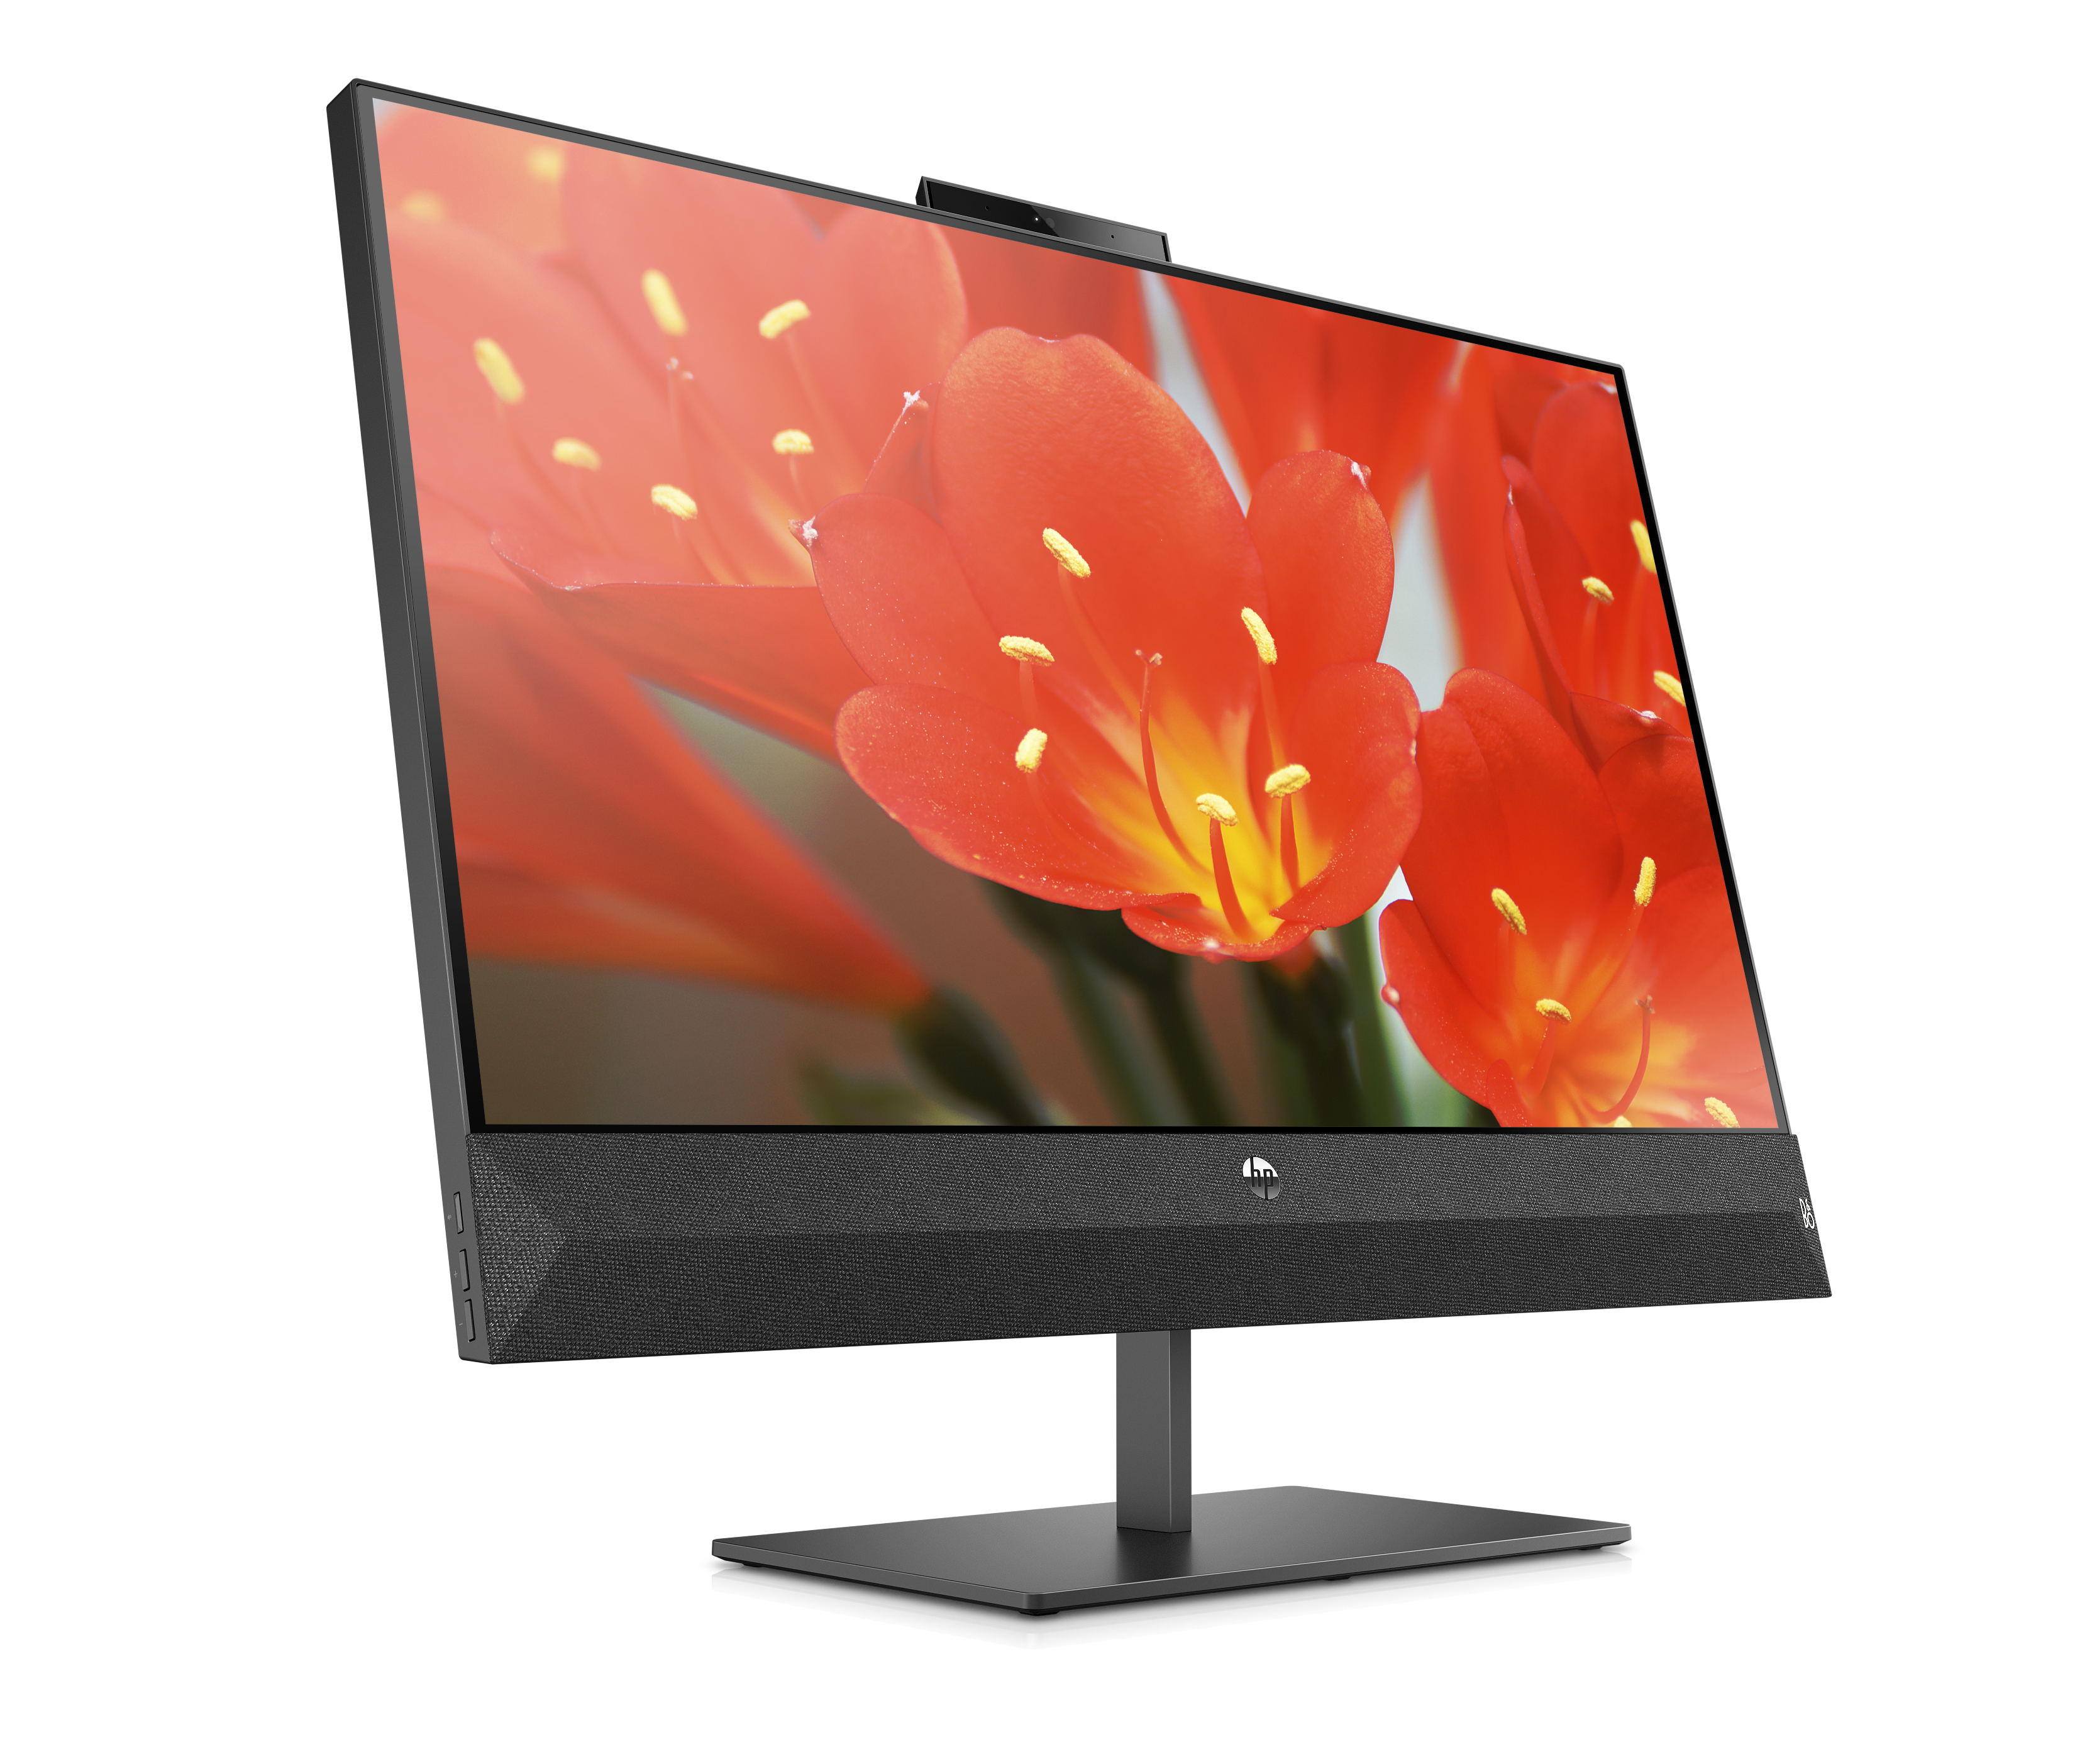 hp launches new monitors and all in one ces 2019 pavilion 27 fhd display frontright camup